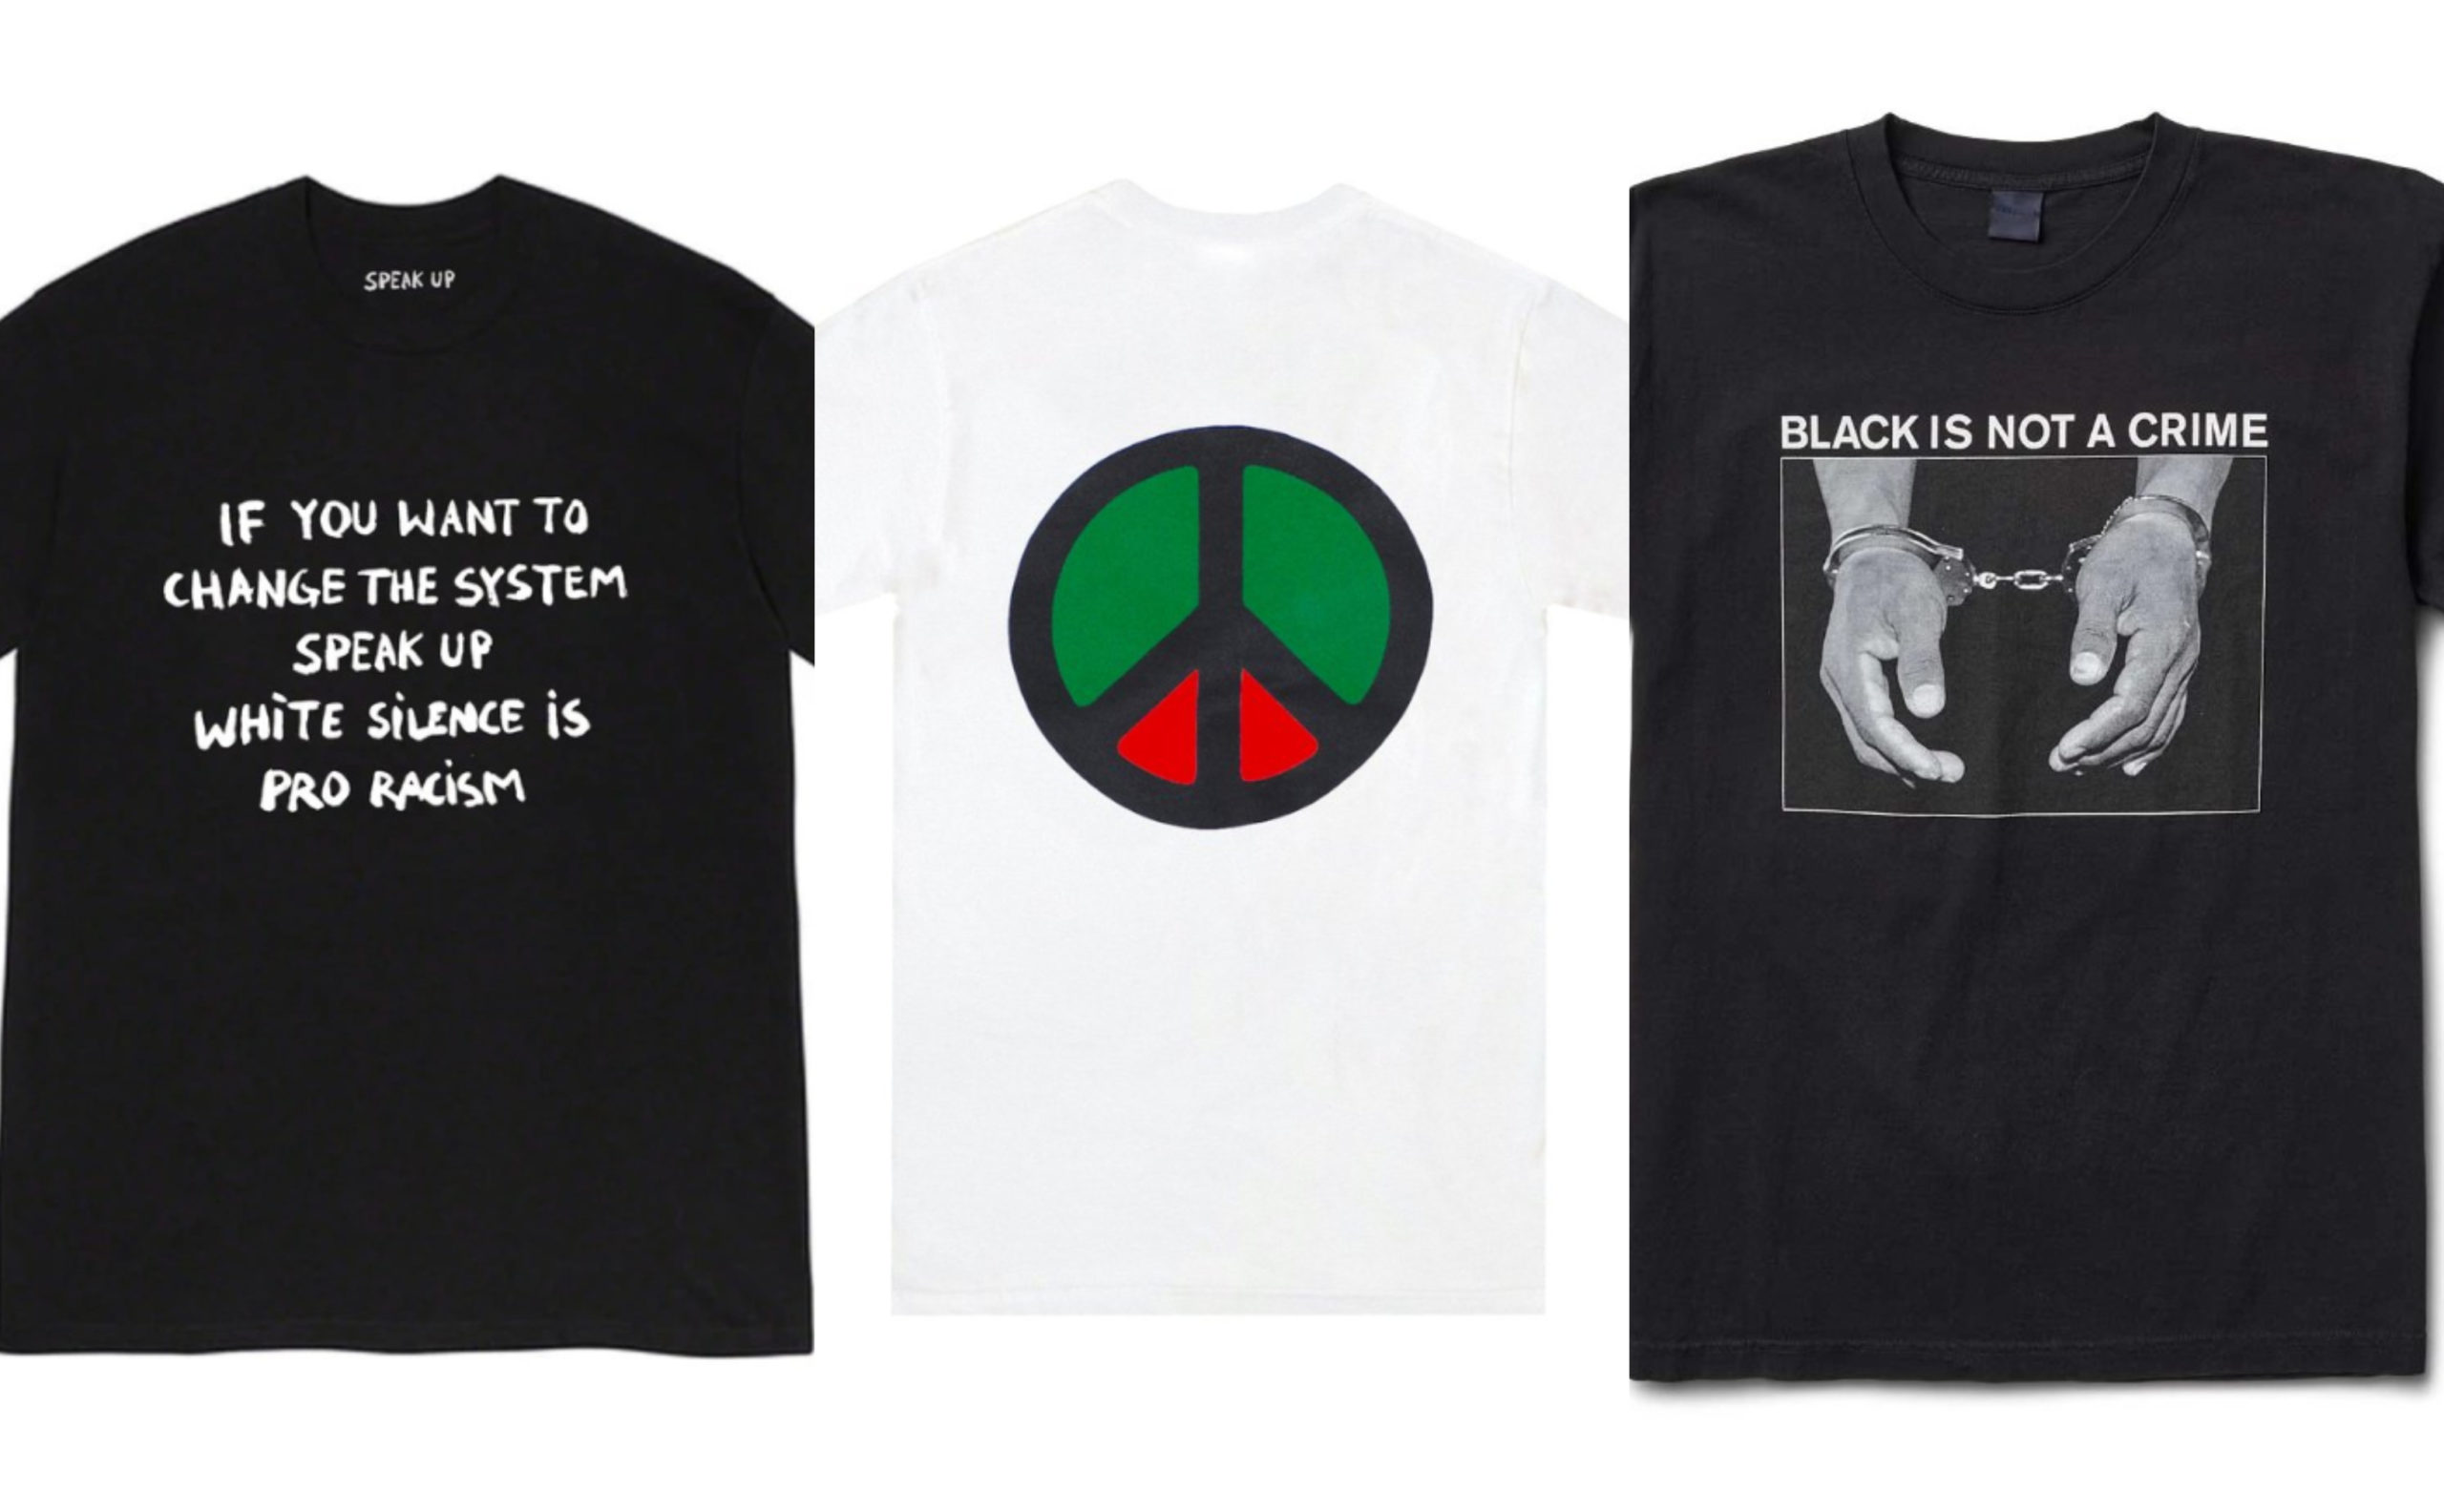 PAUSE Picks: Items that Support Black Communities